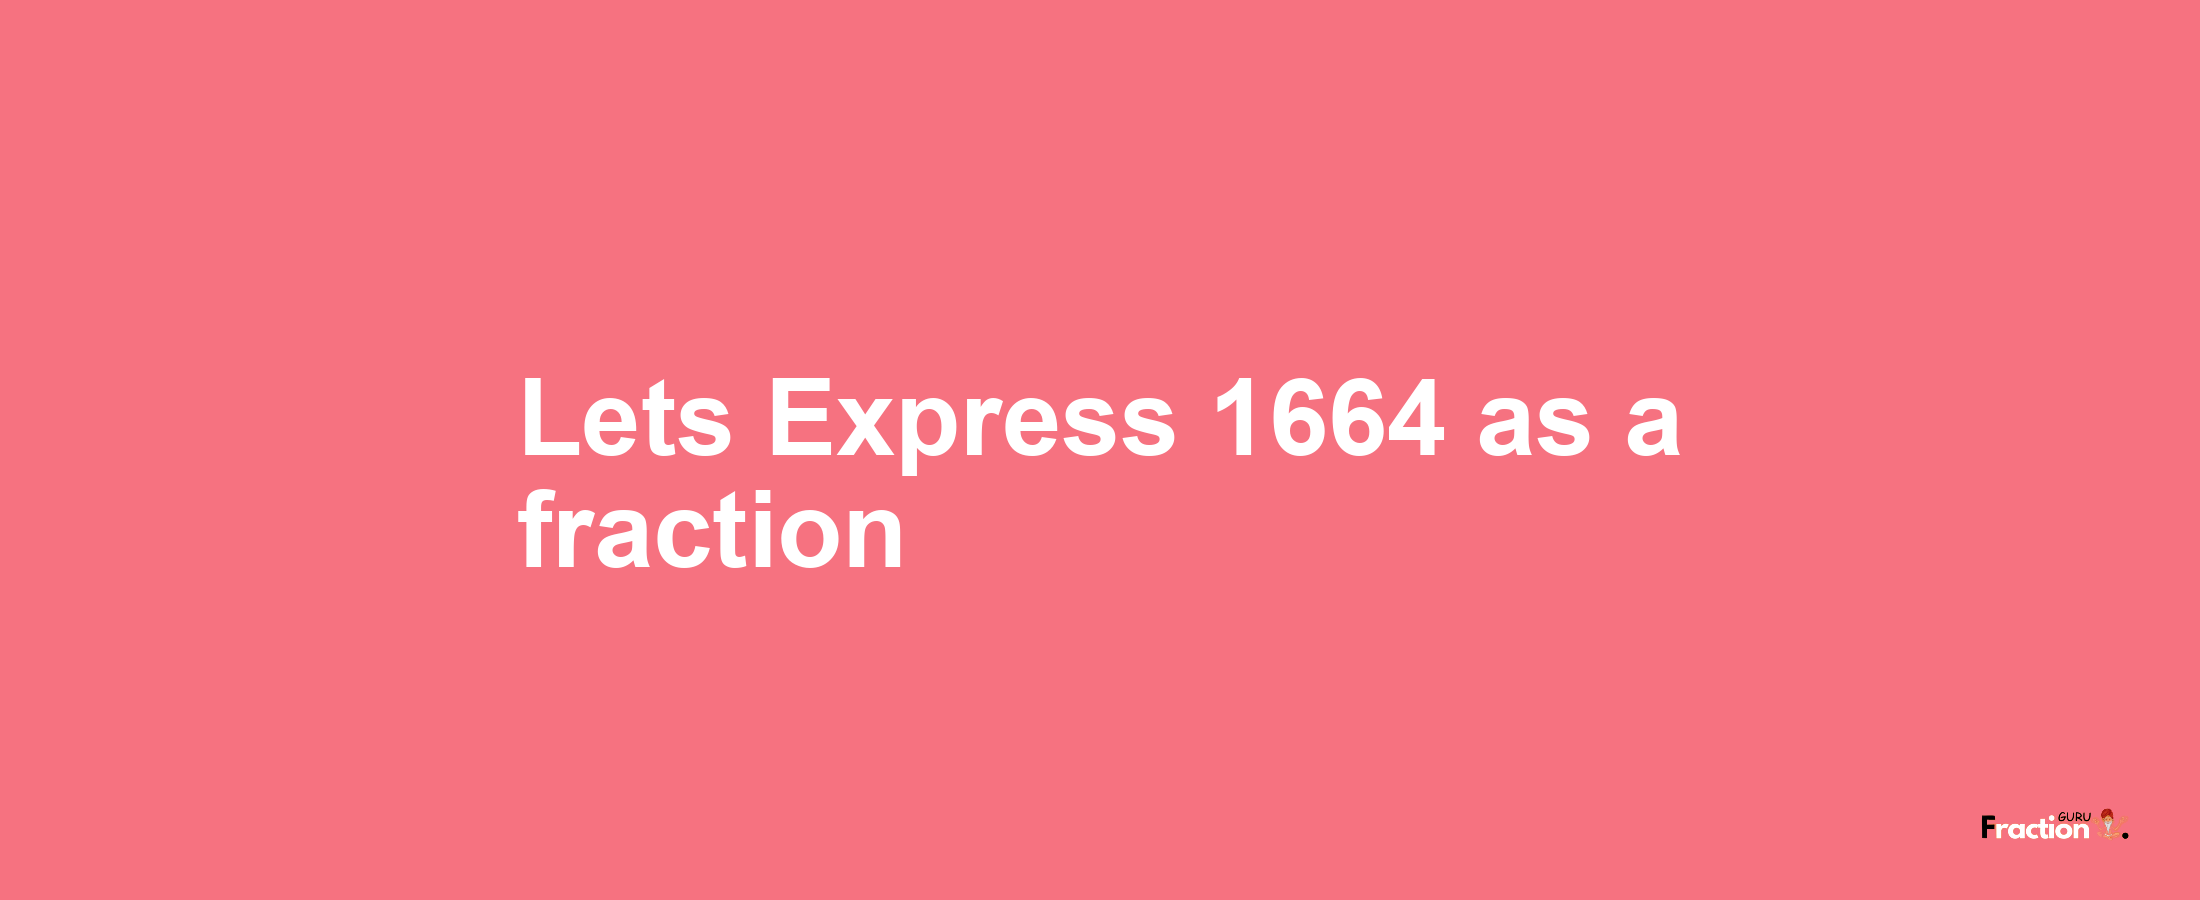 Lets Express 1664 as afraction